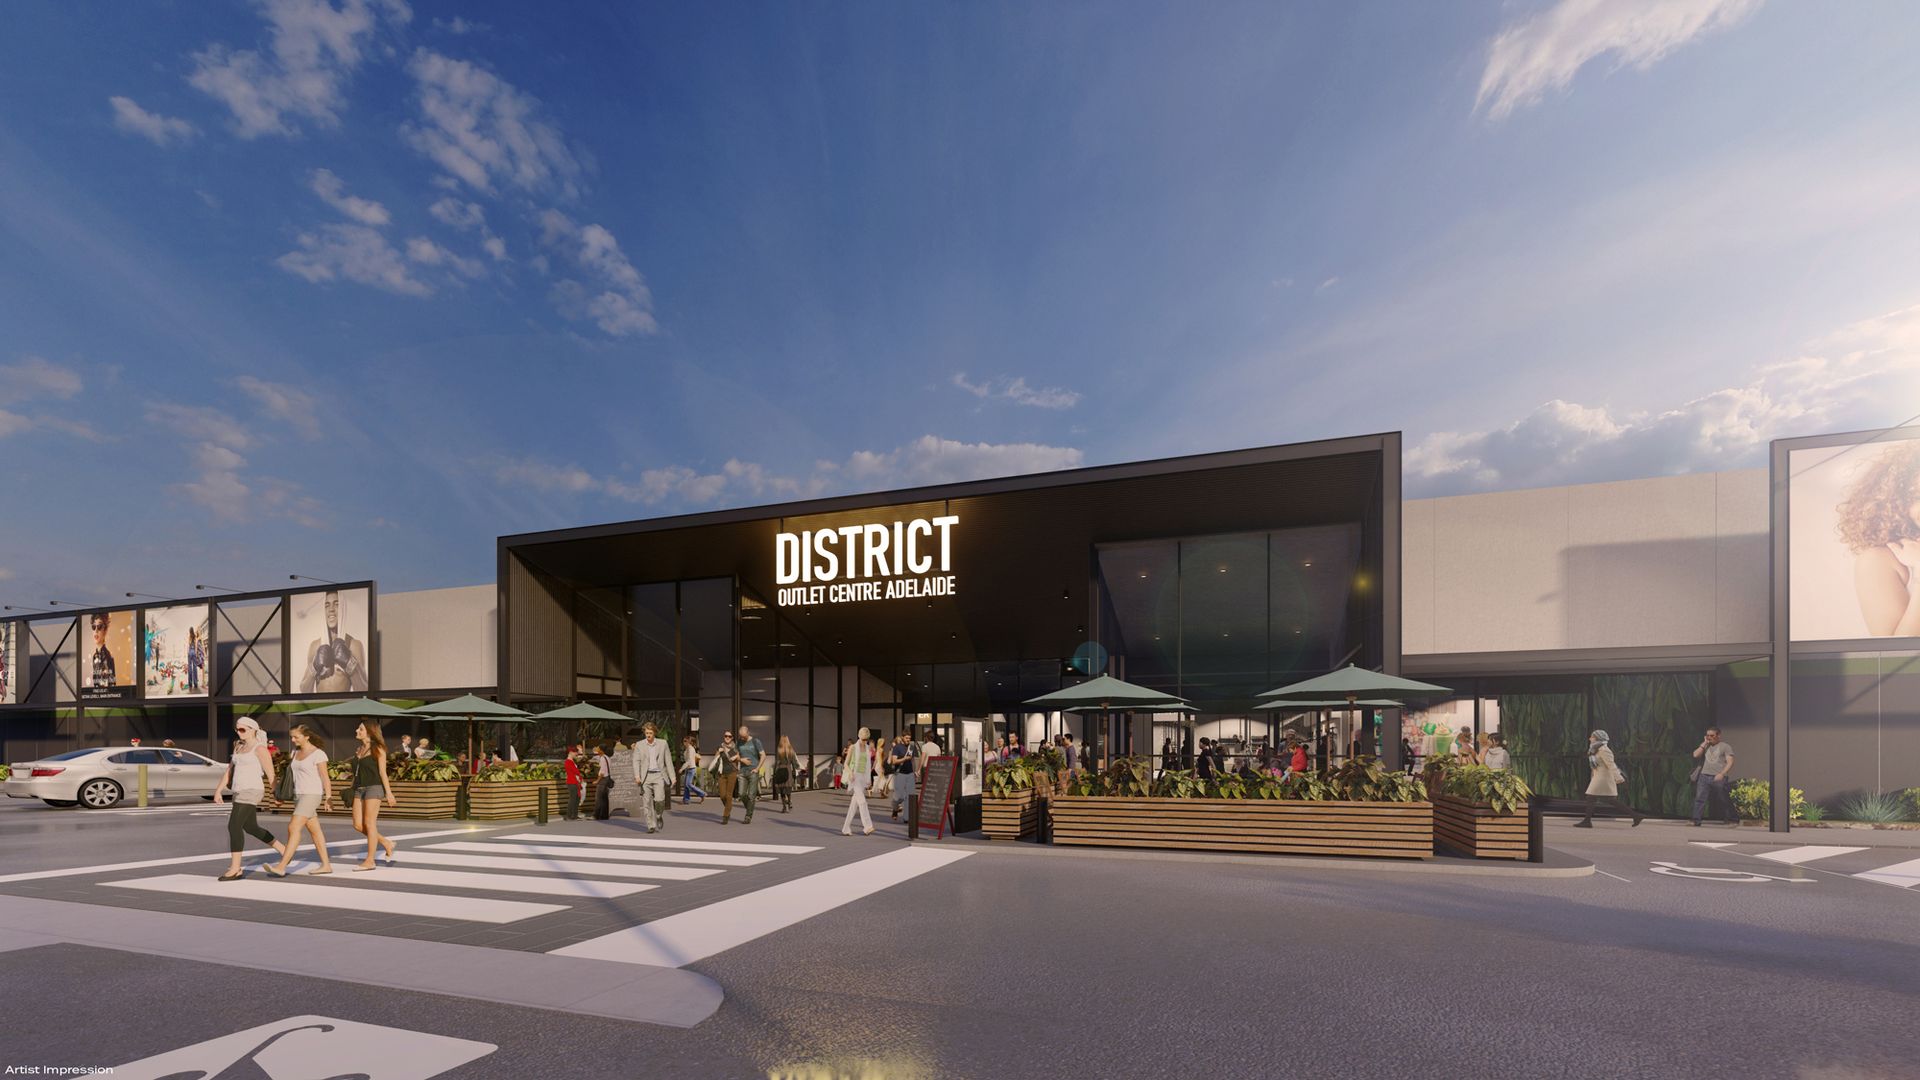 WIN $500 to spend at the Brand New District Outlet Centre Adelaide!